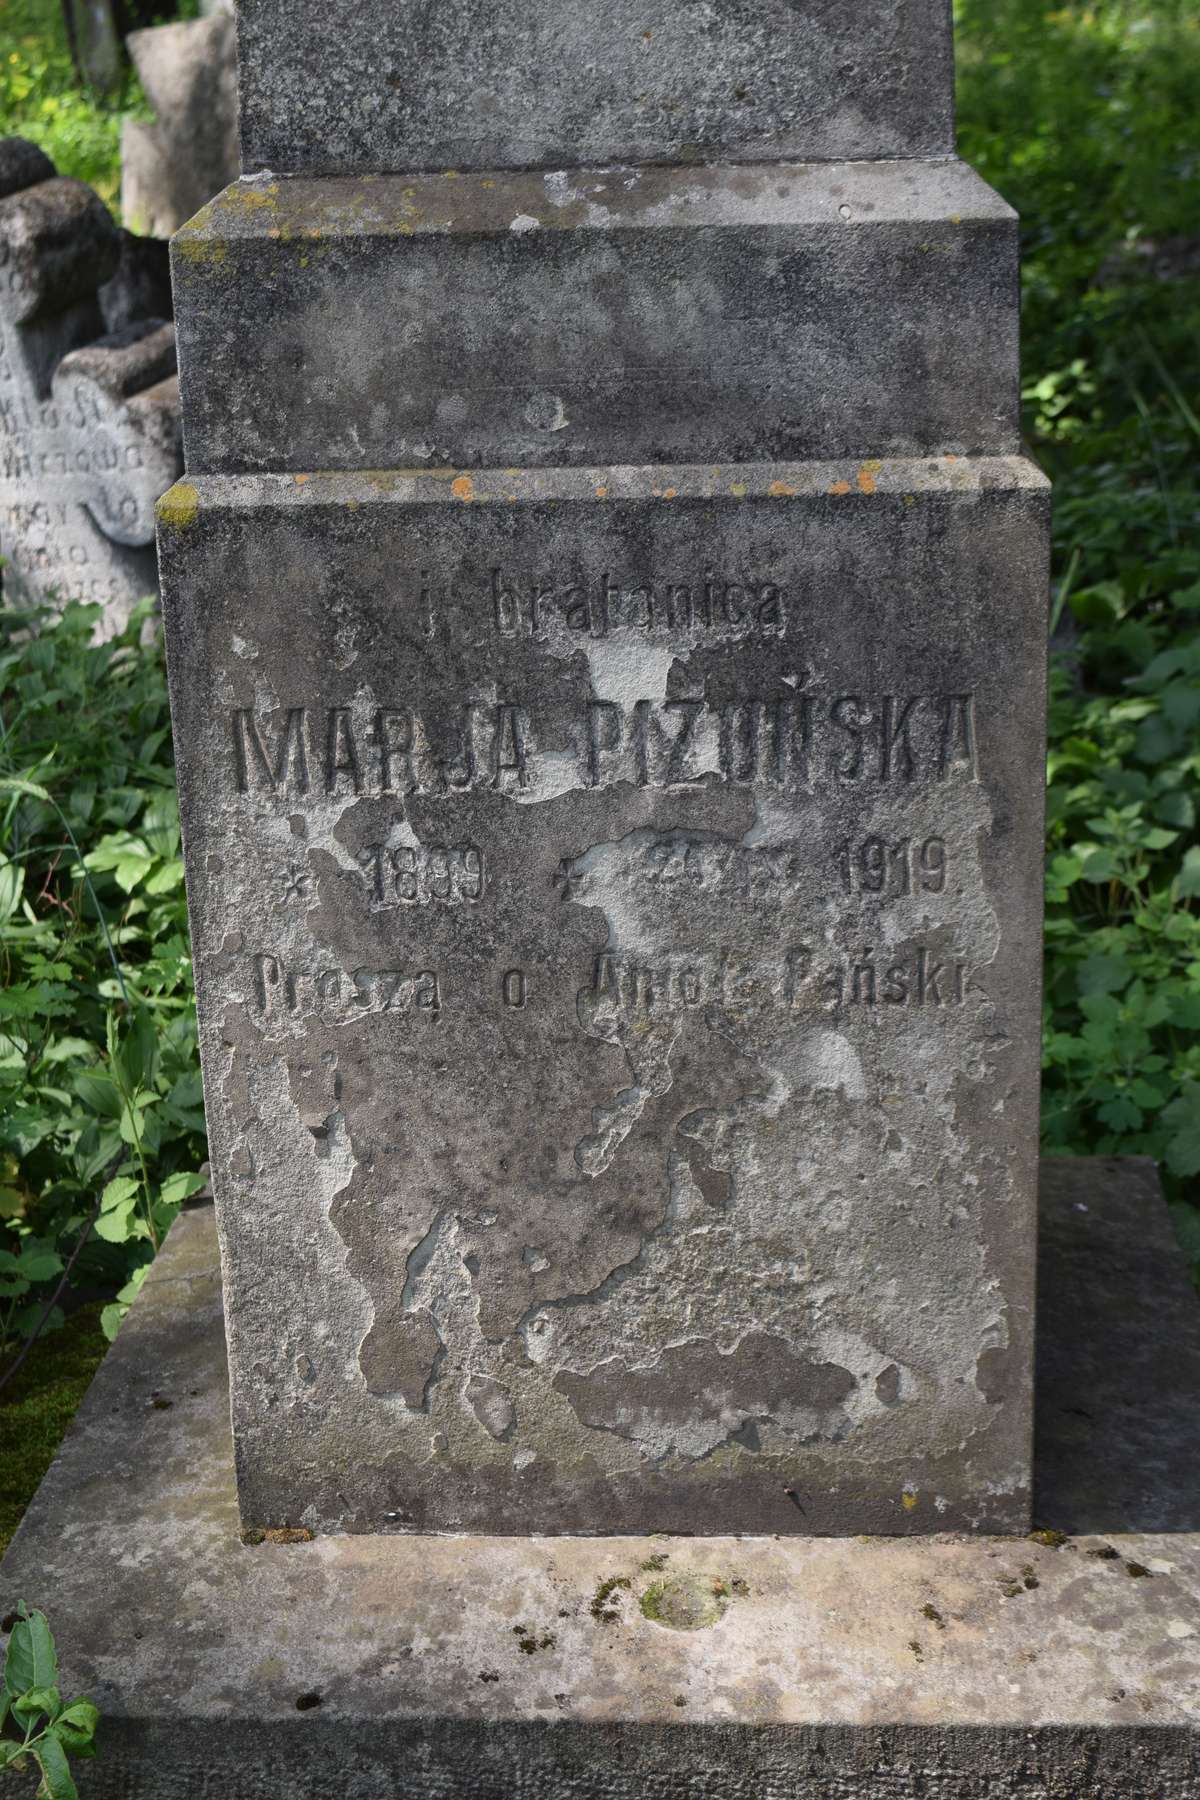 Fragment of the tombstone of Antoni and Maria Pizunski, Zbarazh cemetery, as of 2018